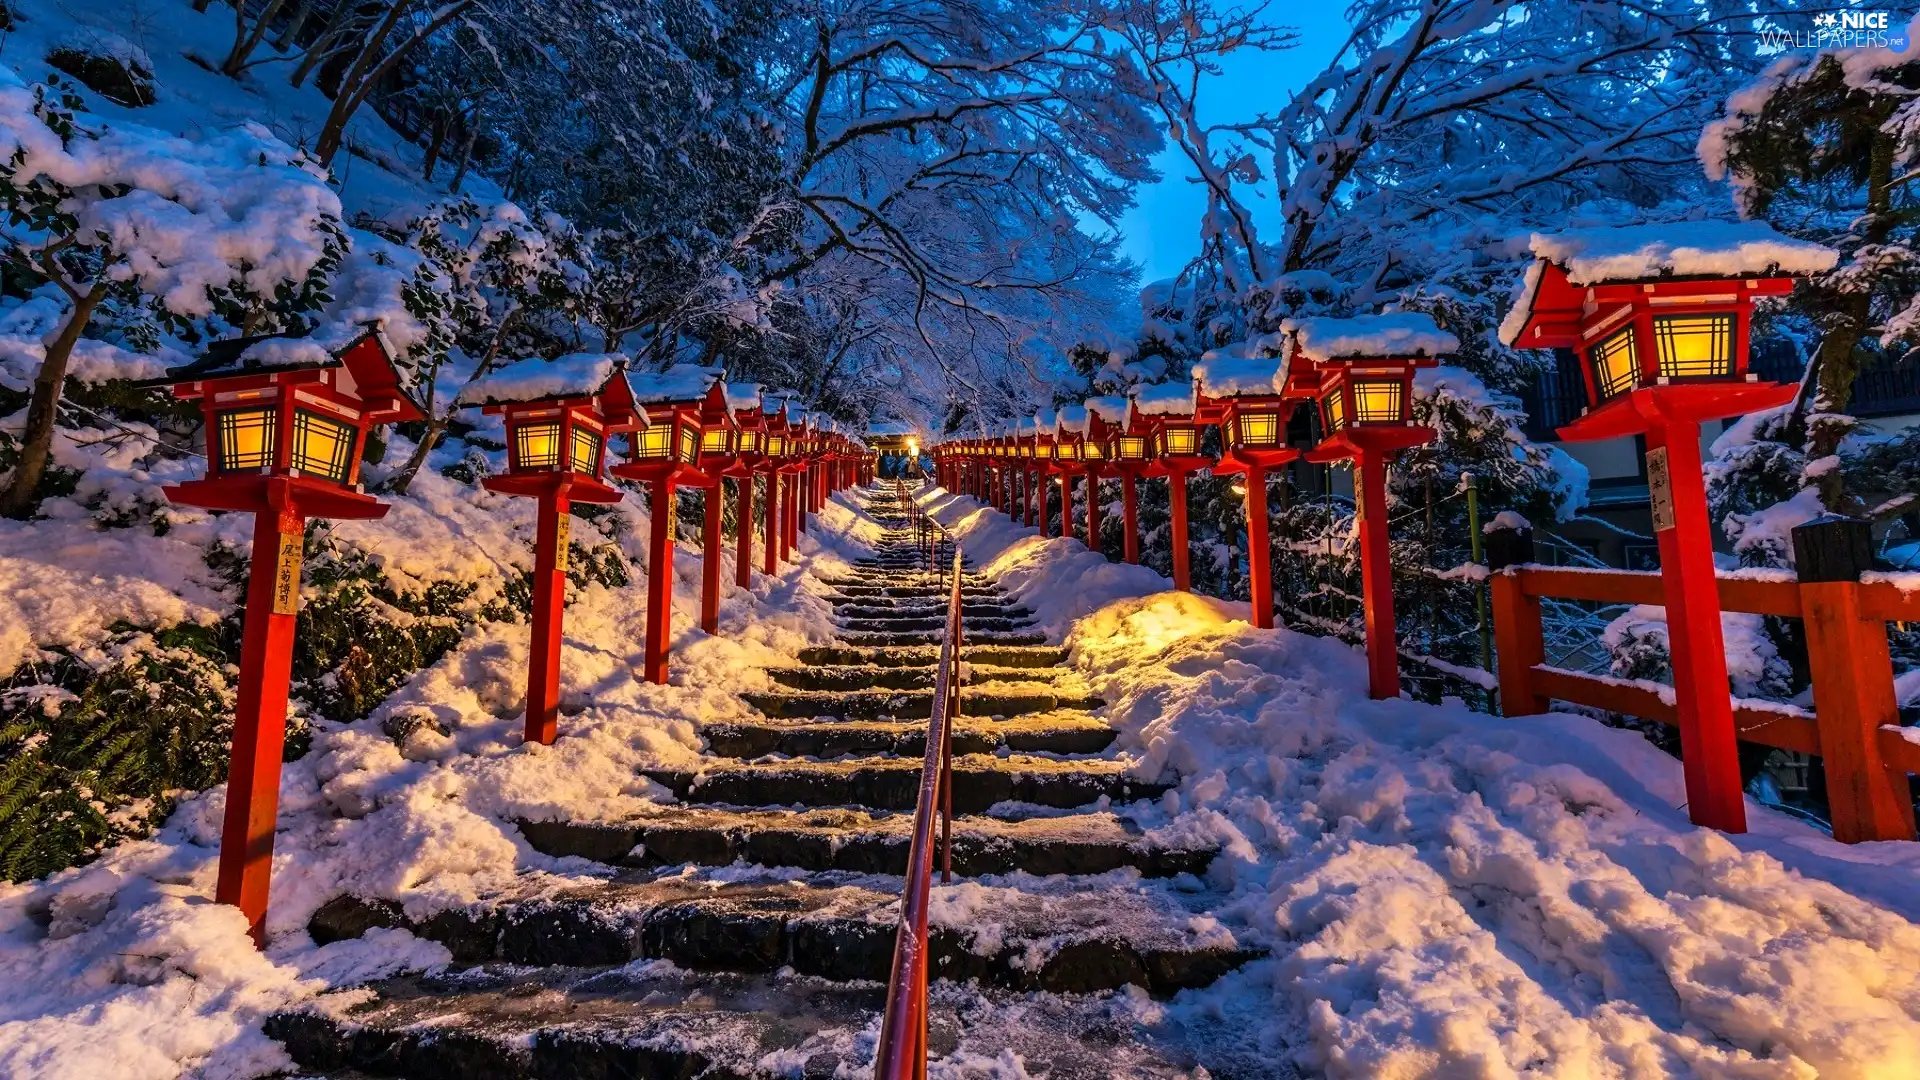 lighting, icy, snow, winter, Lamps, Stairs